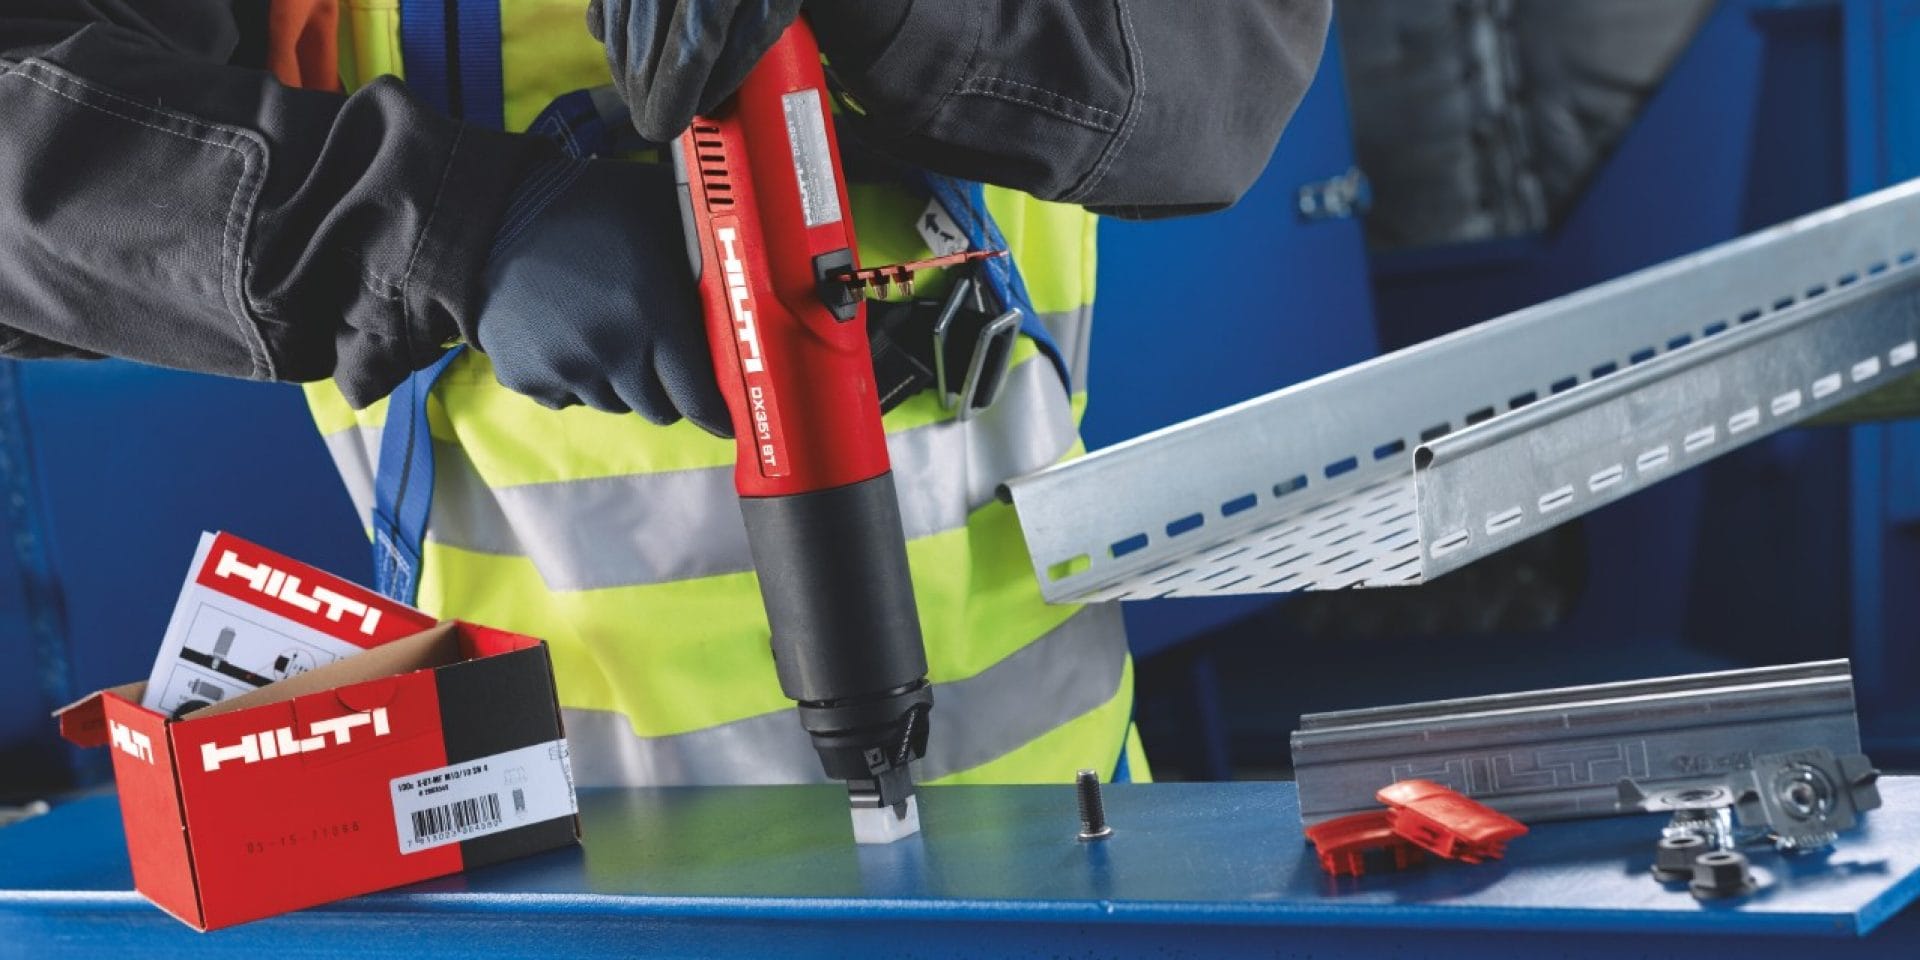 Fixing electrical elements to steel with Hilti direct fastening tools